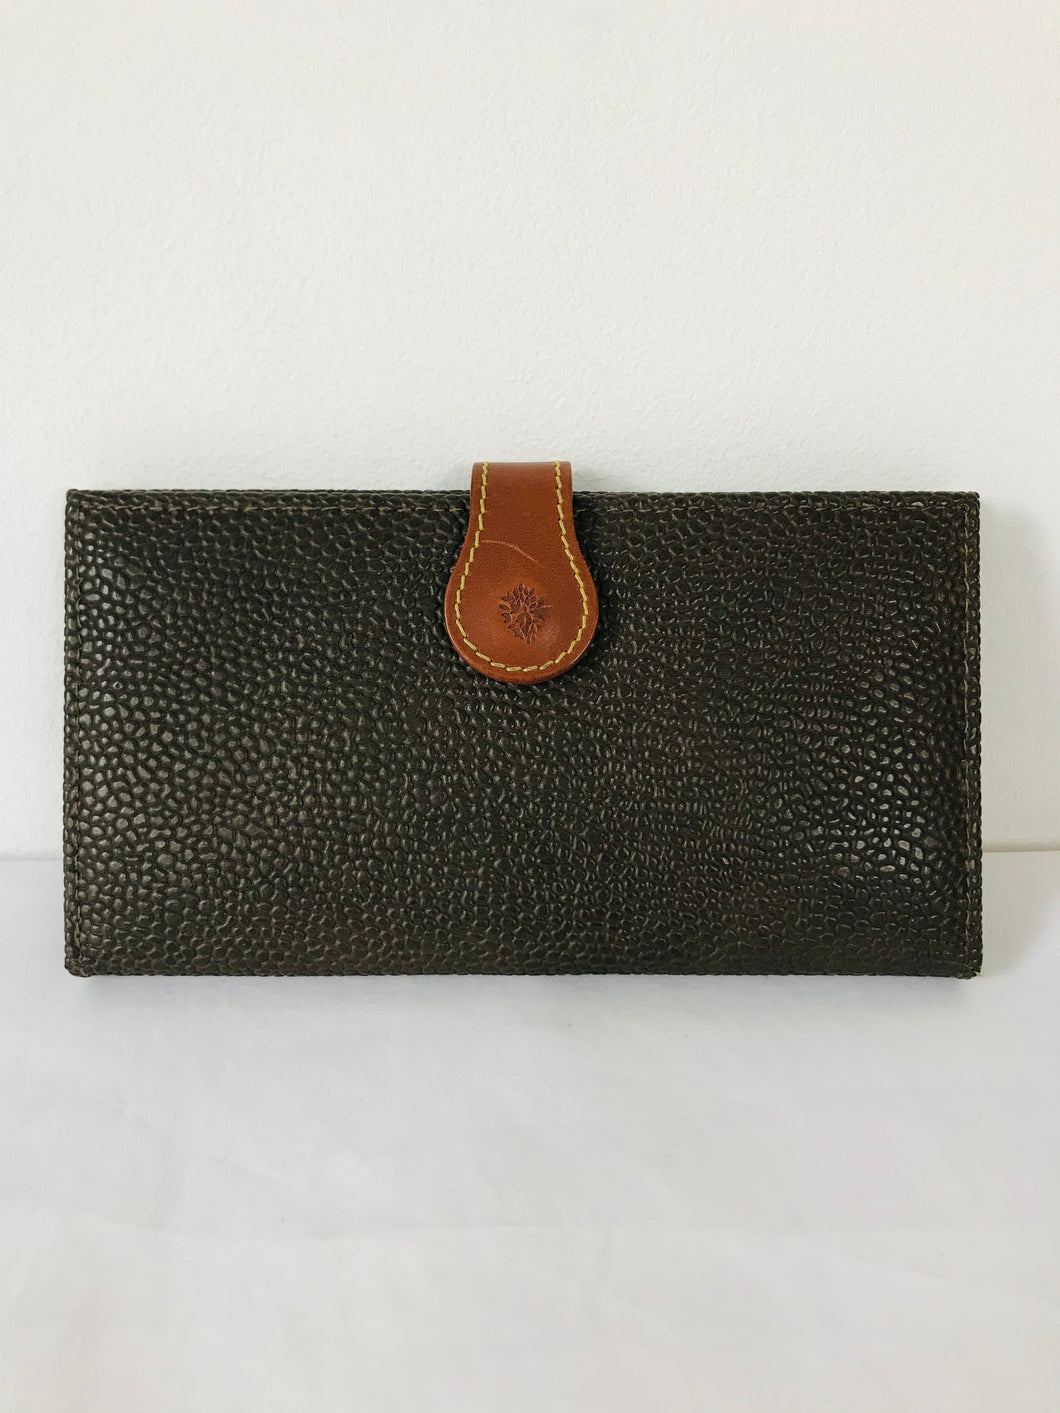 Mulberry Women’s Purse Wallet | Small | Brown